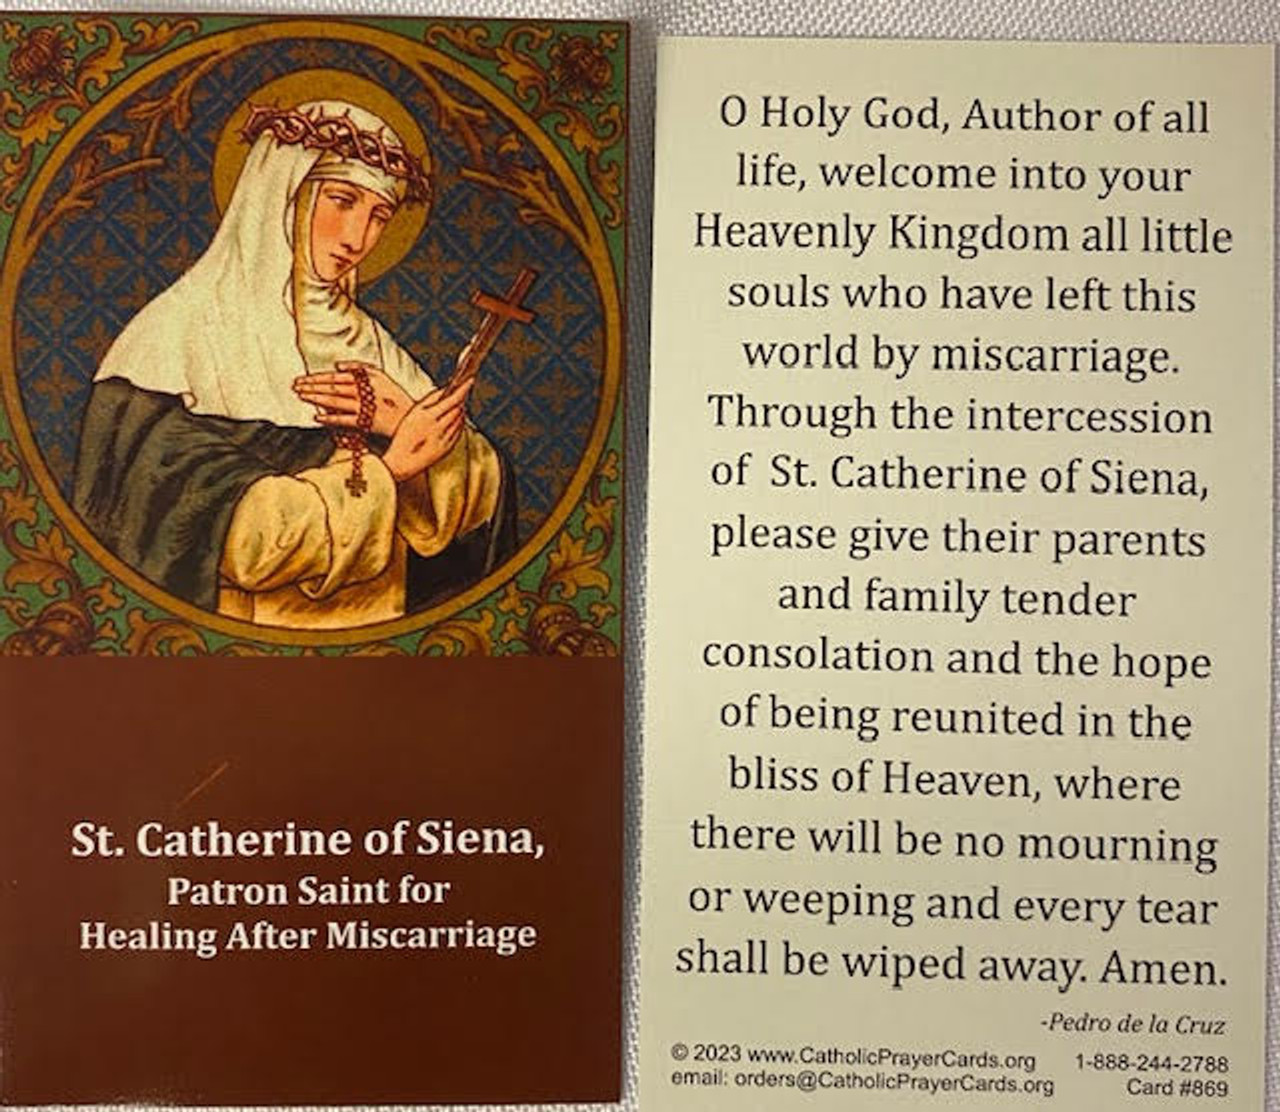 St. Catherine of Siena, Healing After Miscarriage